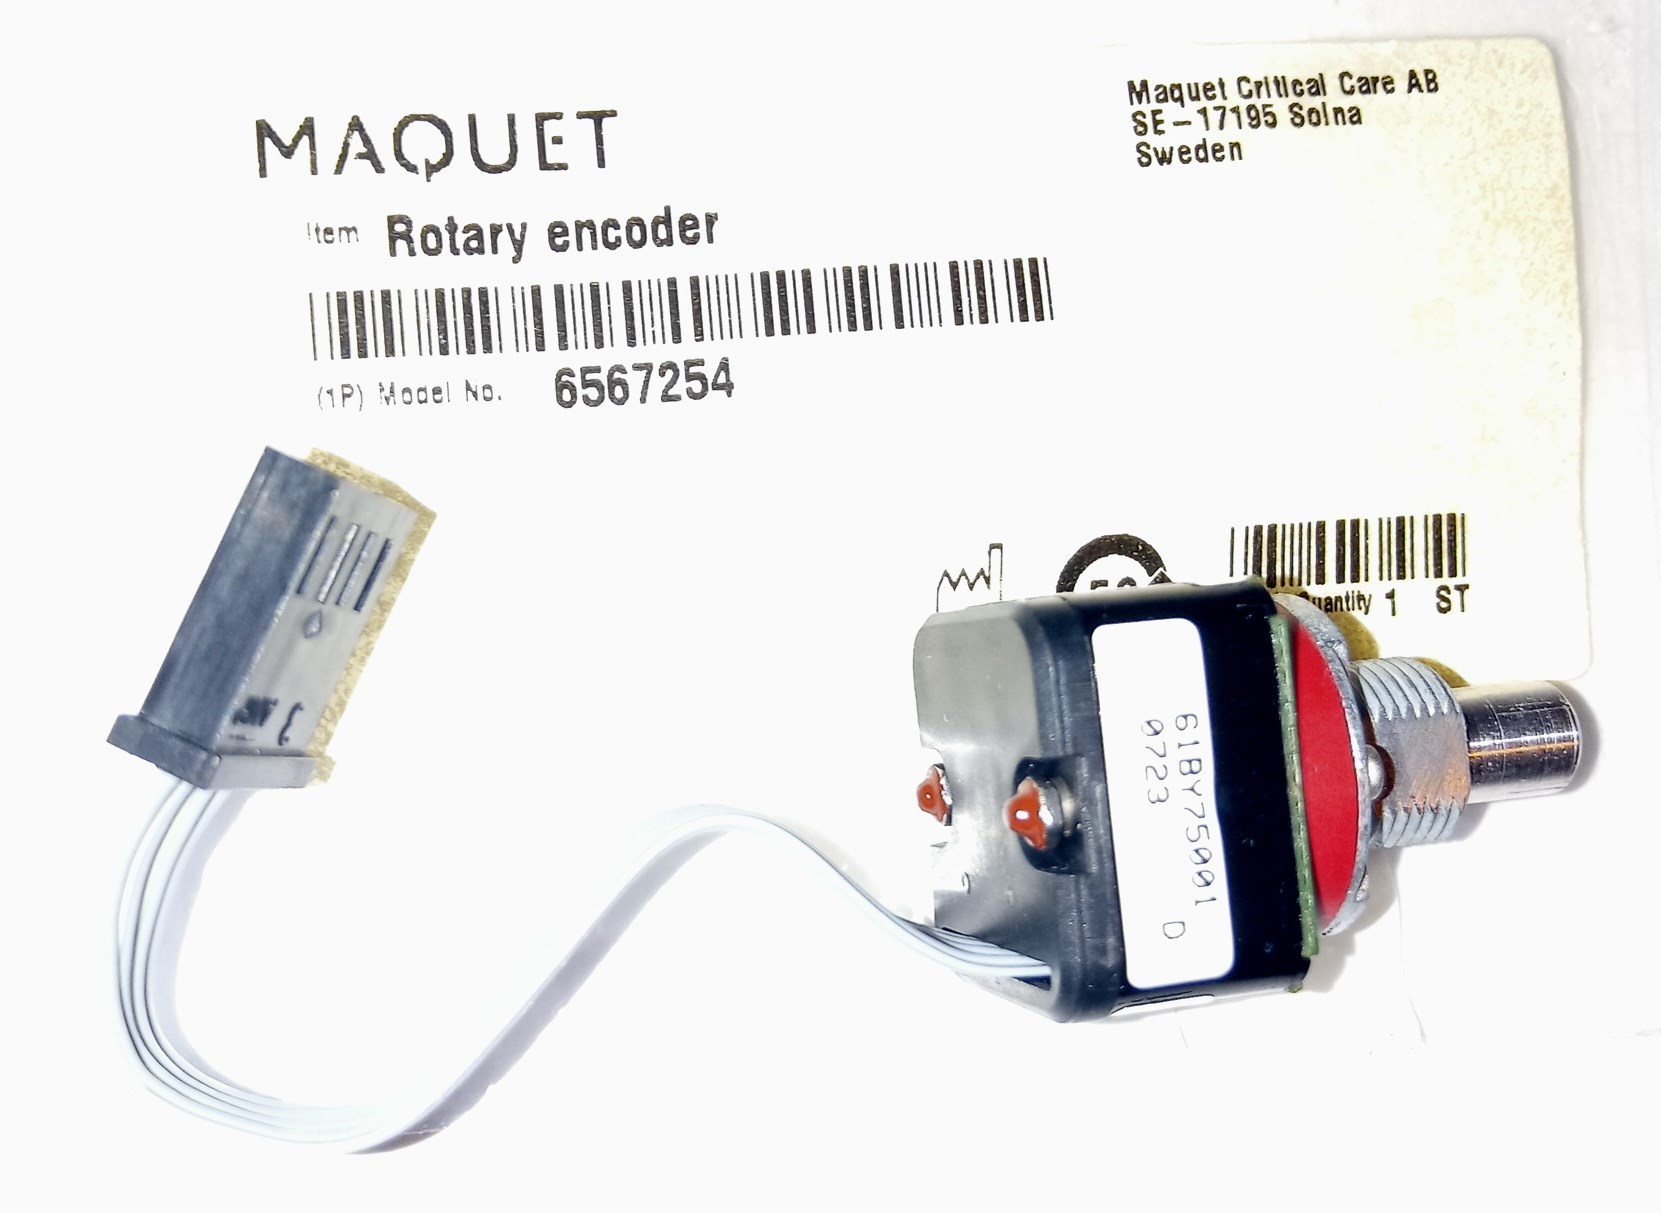 ROTARY ENCODER 6567254 by Getinge-Maquet USA Sales